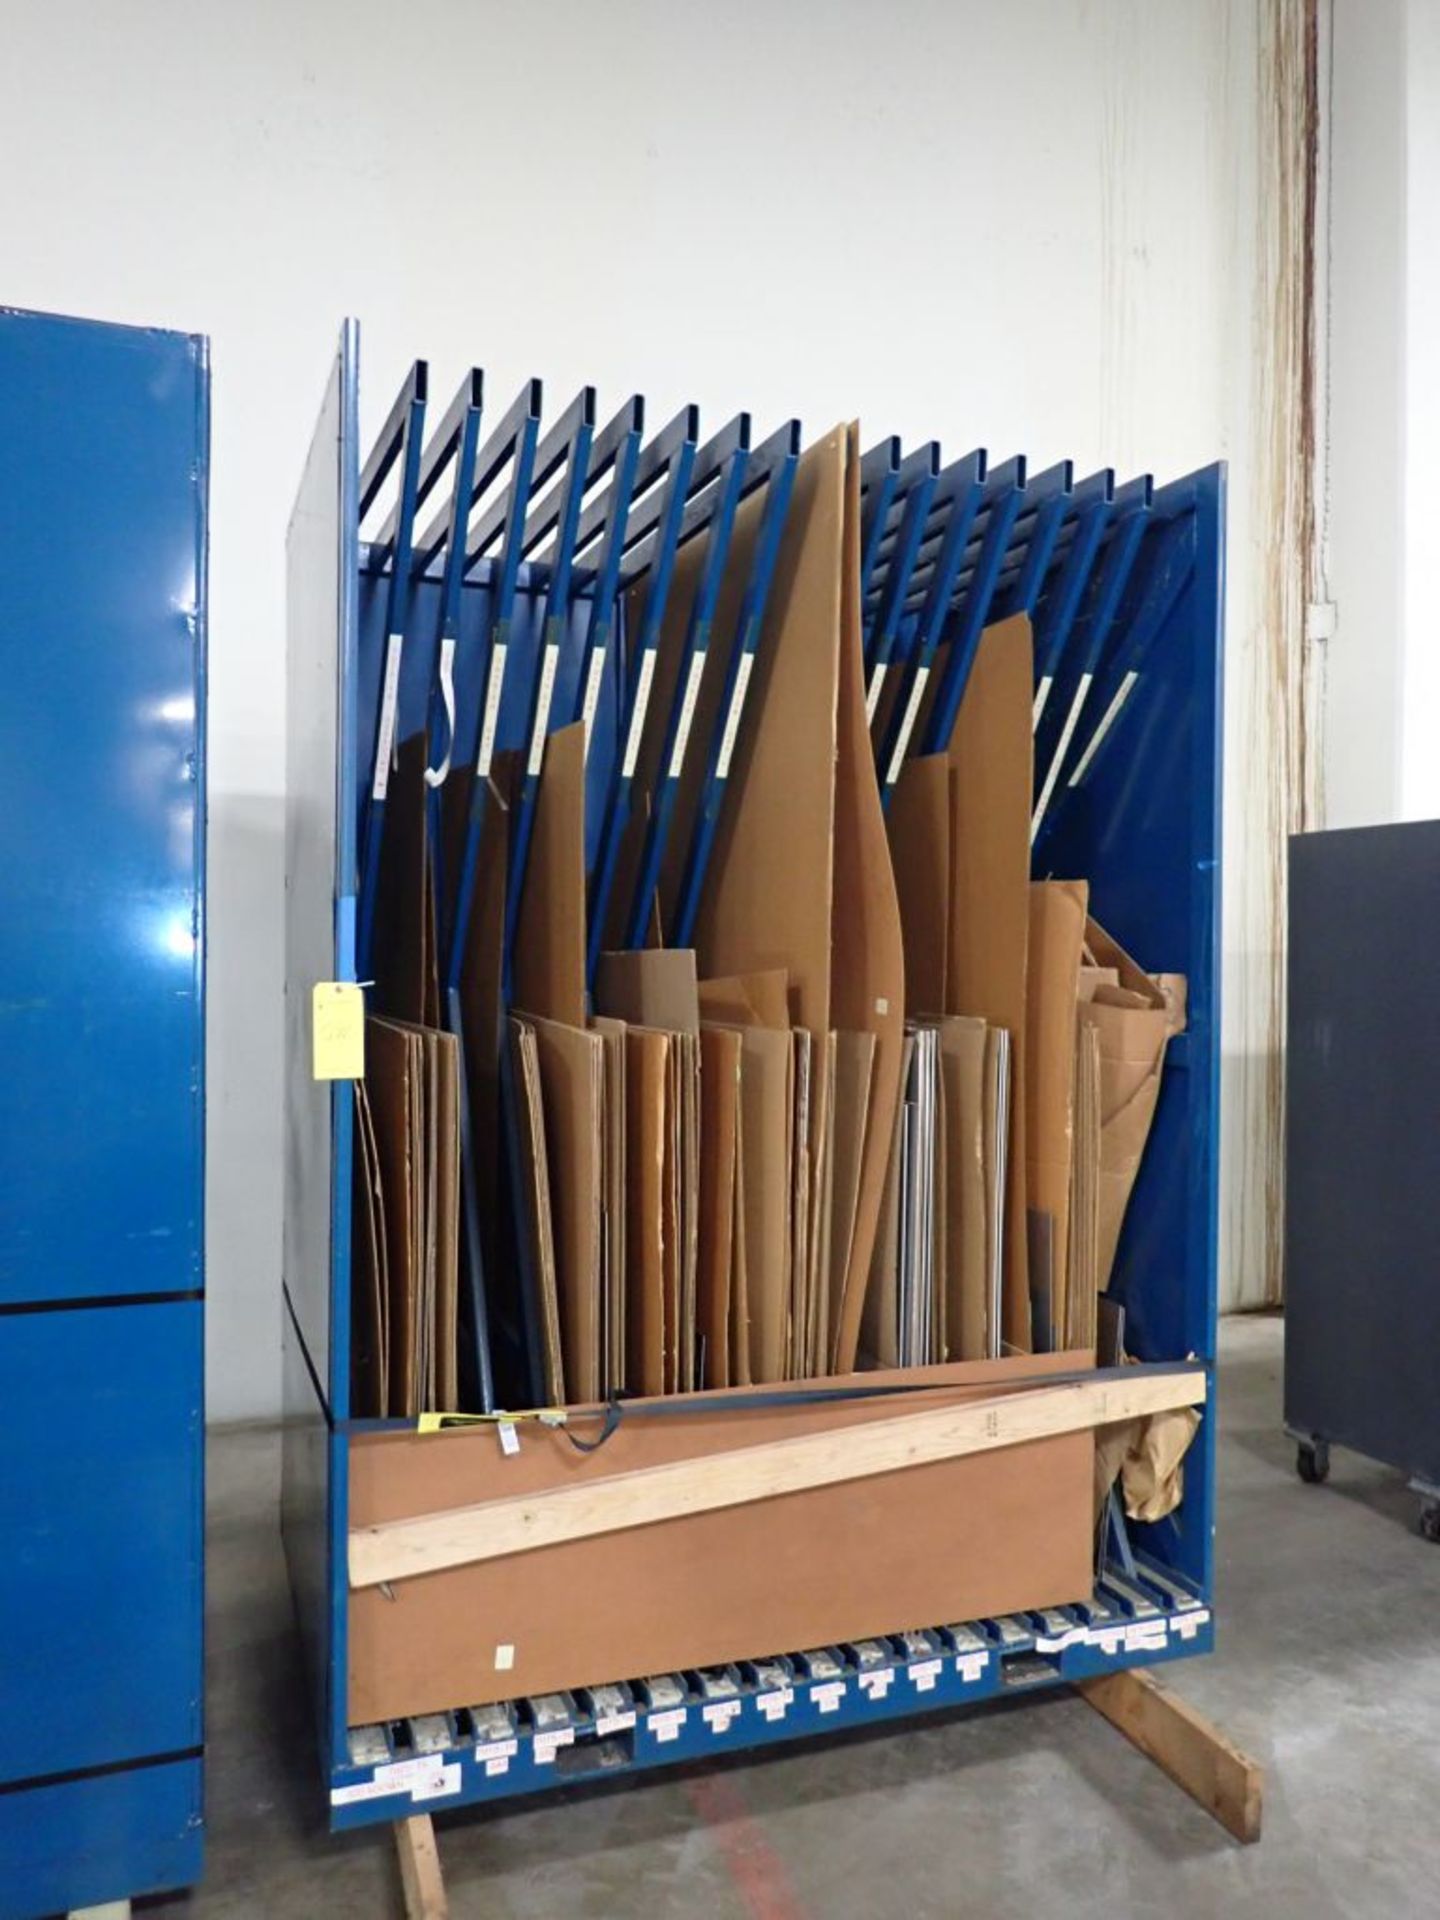 Sheet Storage System w/Assorted Aluminum Sheets | Tag: 241590 | Limited Forklift Assistance - Image 2 of 3